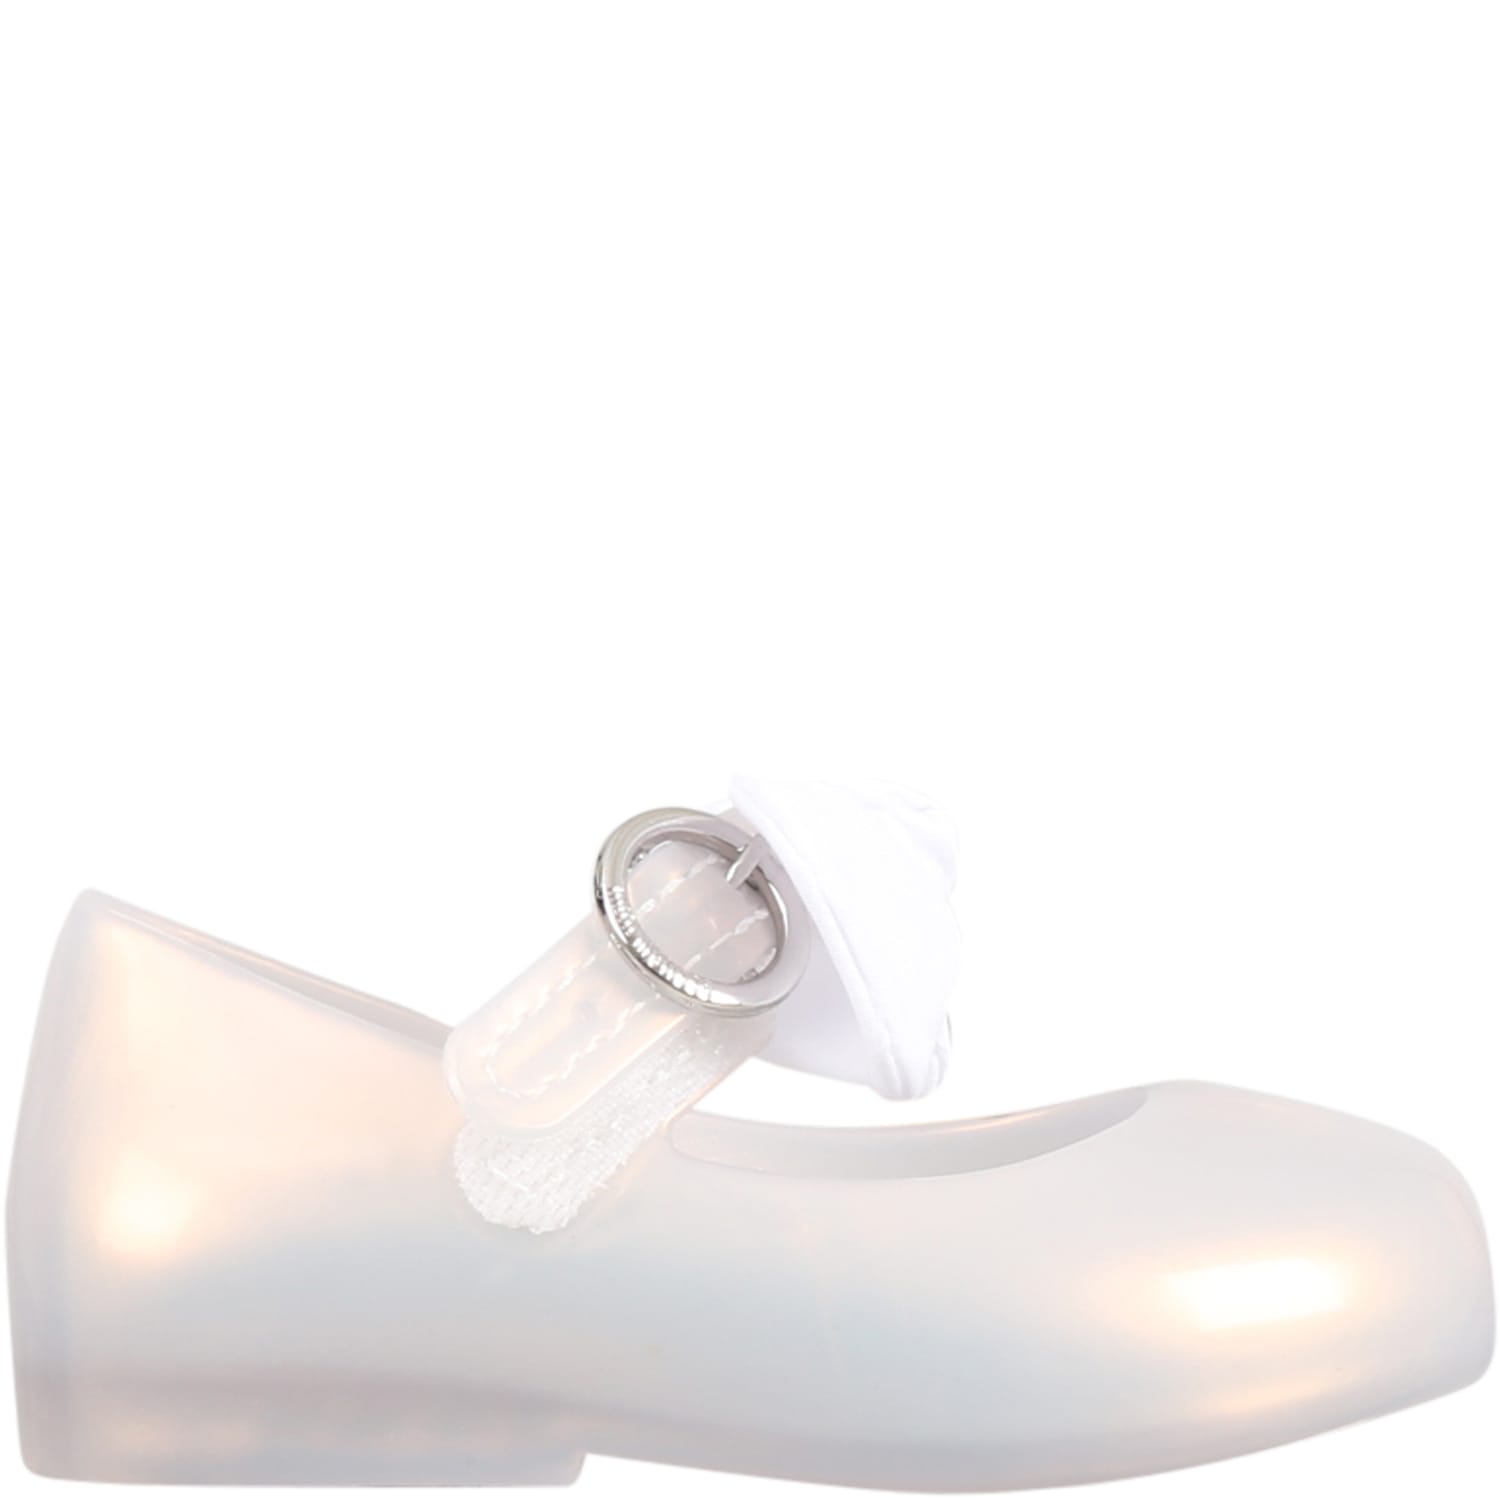 Melissa White Ballerina Flats For Girl With Bow